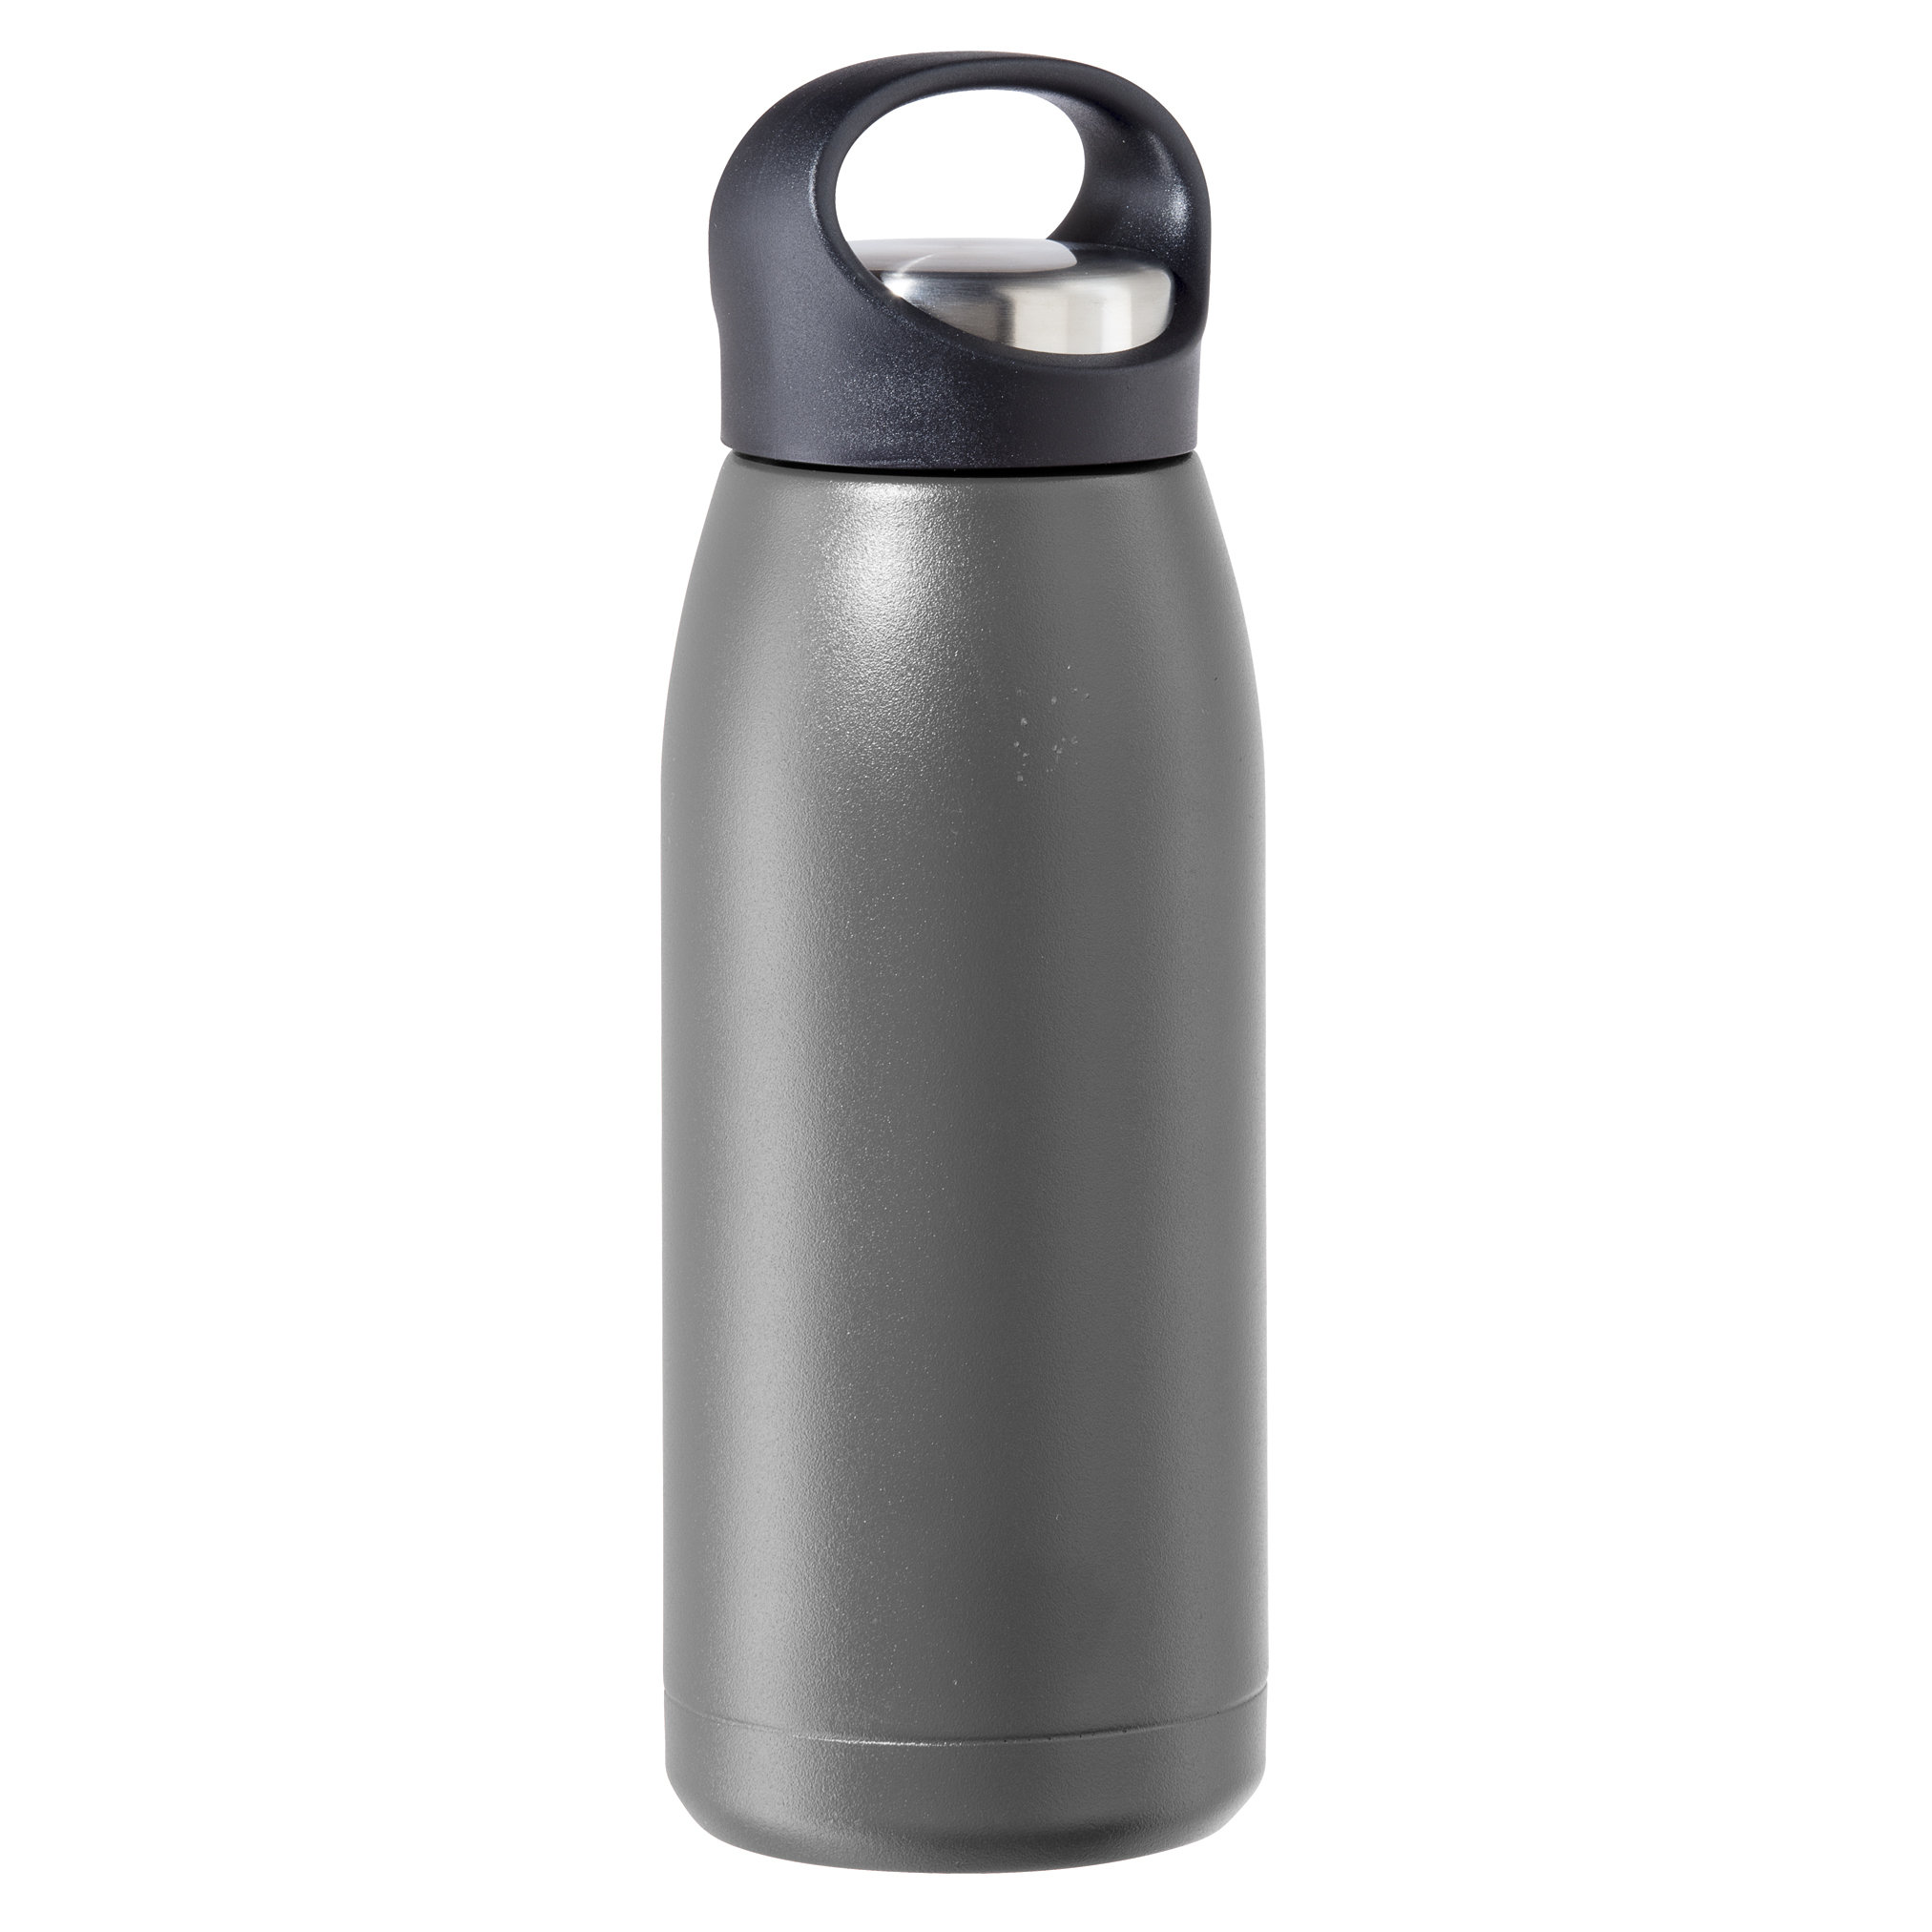 Koolatron 12V Insulated Vacuum Flask with Heater, 1L Stainless